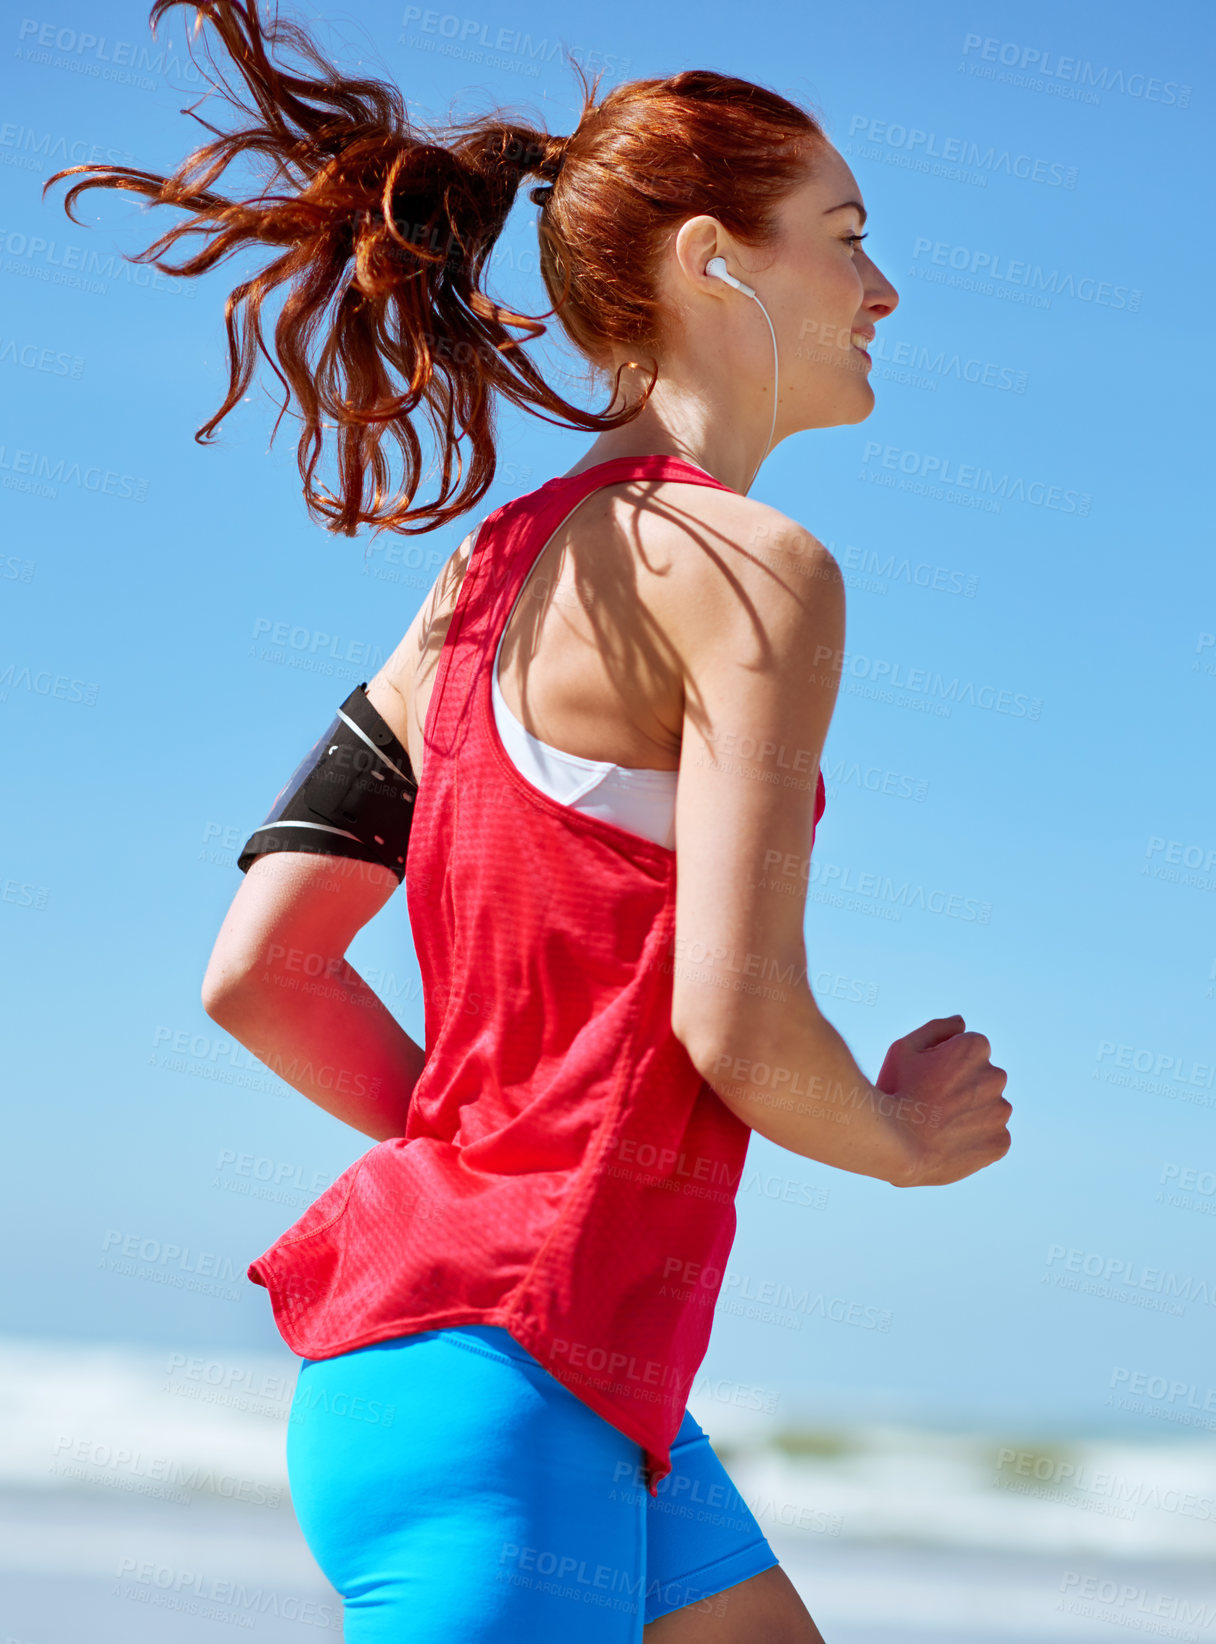 Buy stock photo Cropped shot of a young woman running on the beach